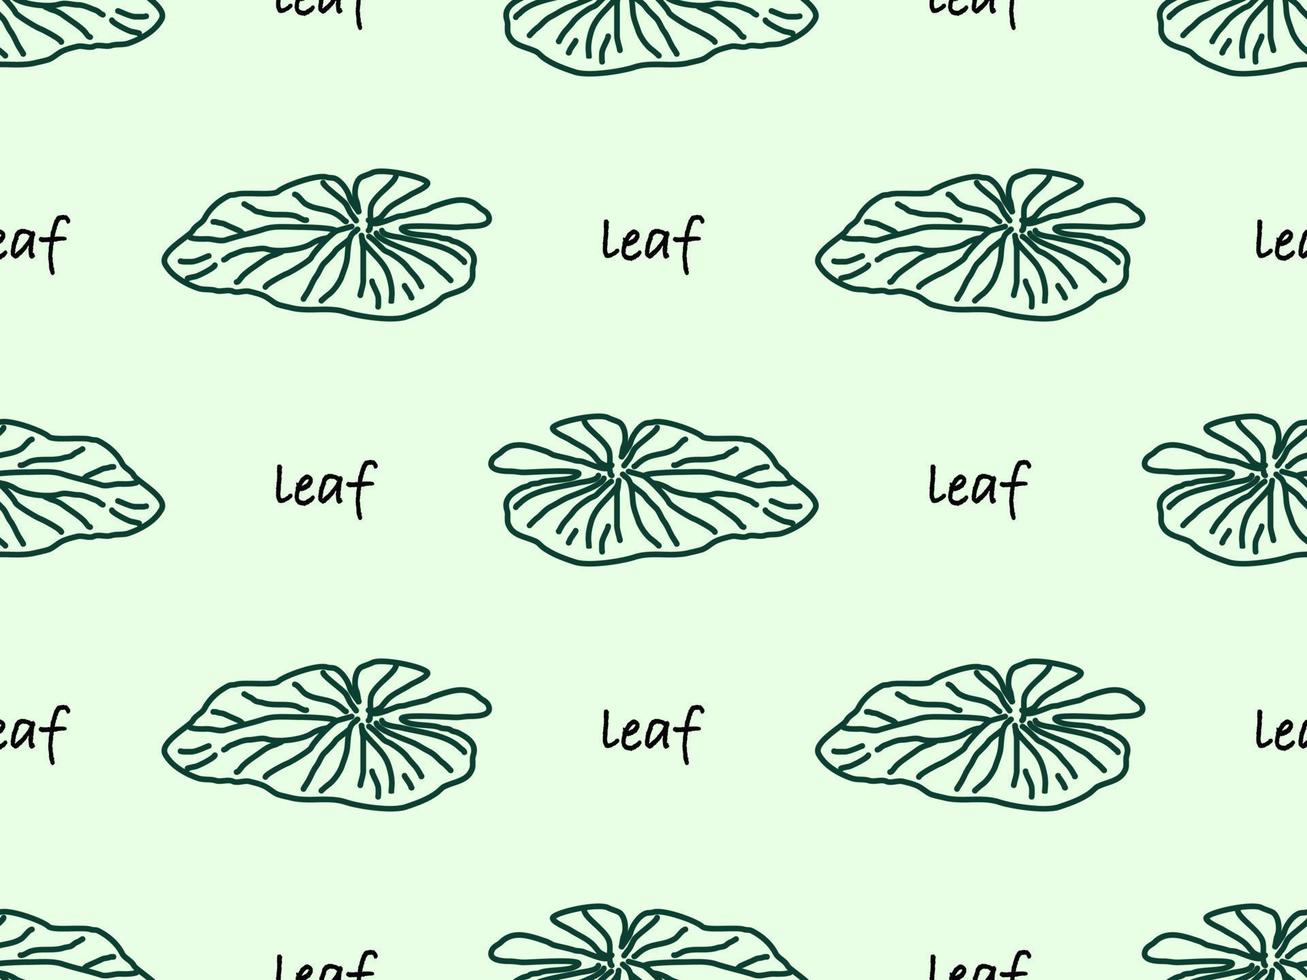 Leaf cartoon character seamless pattern on green background vector